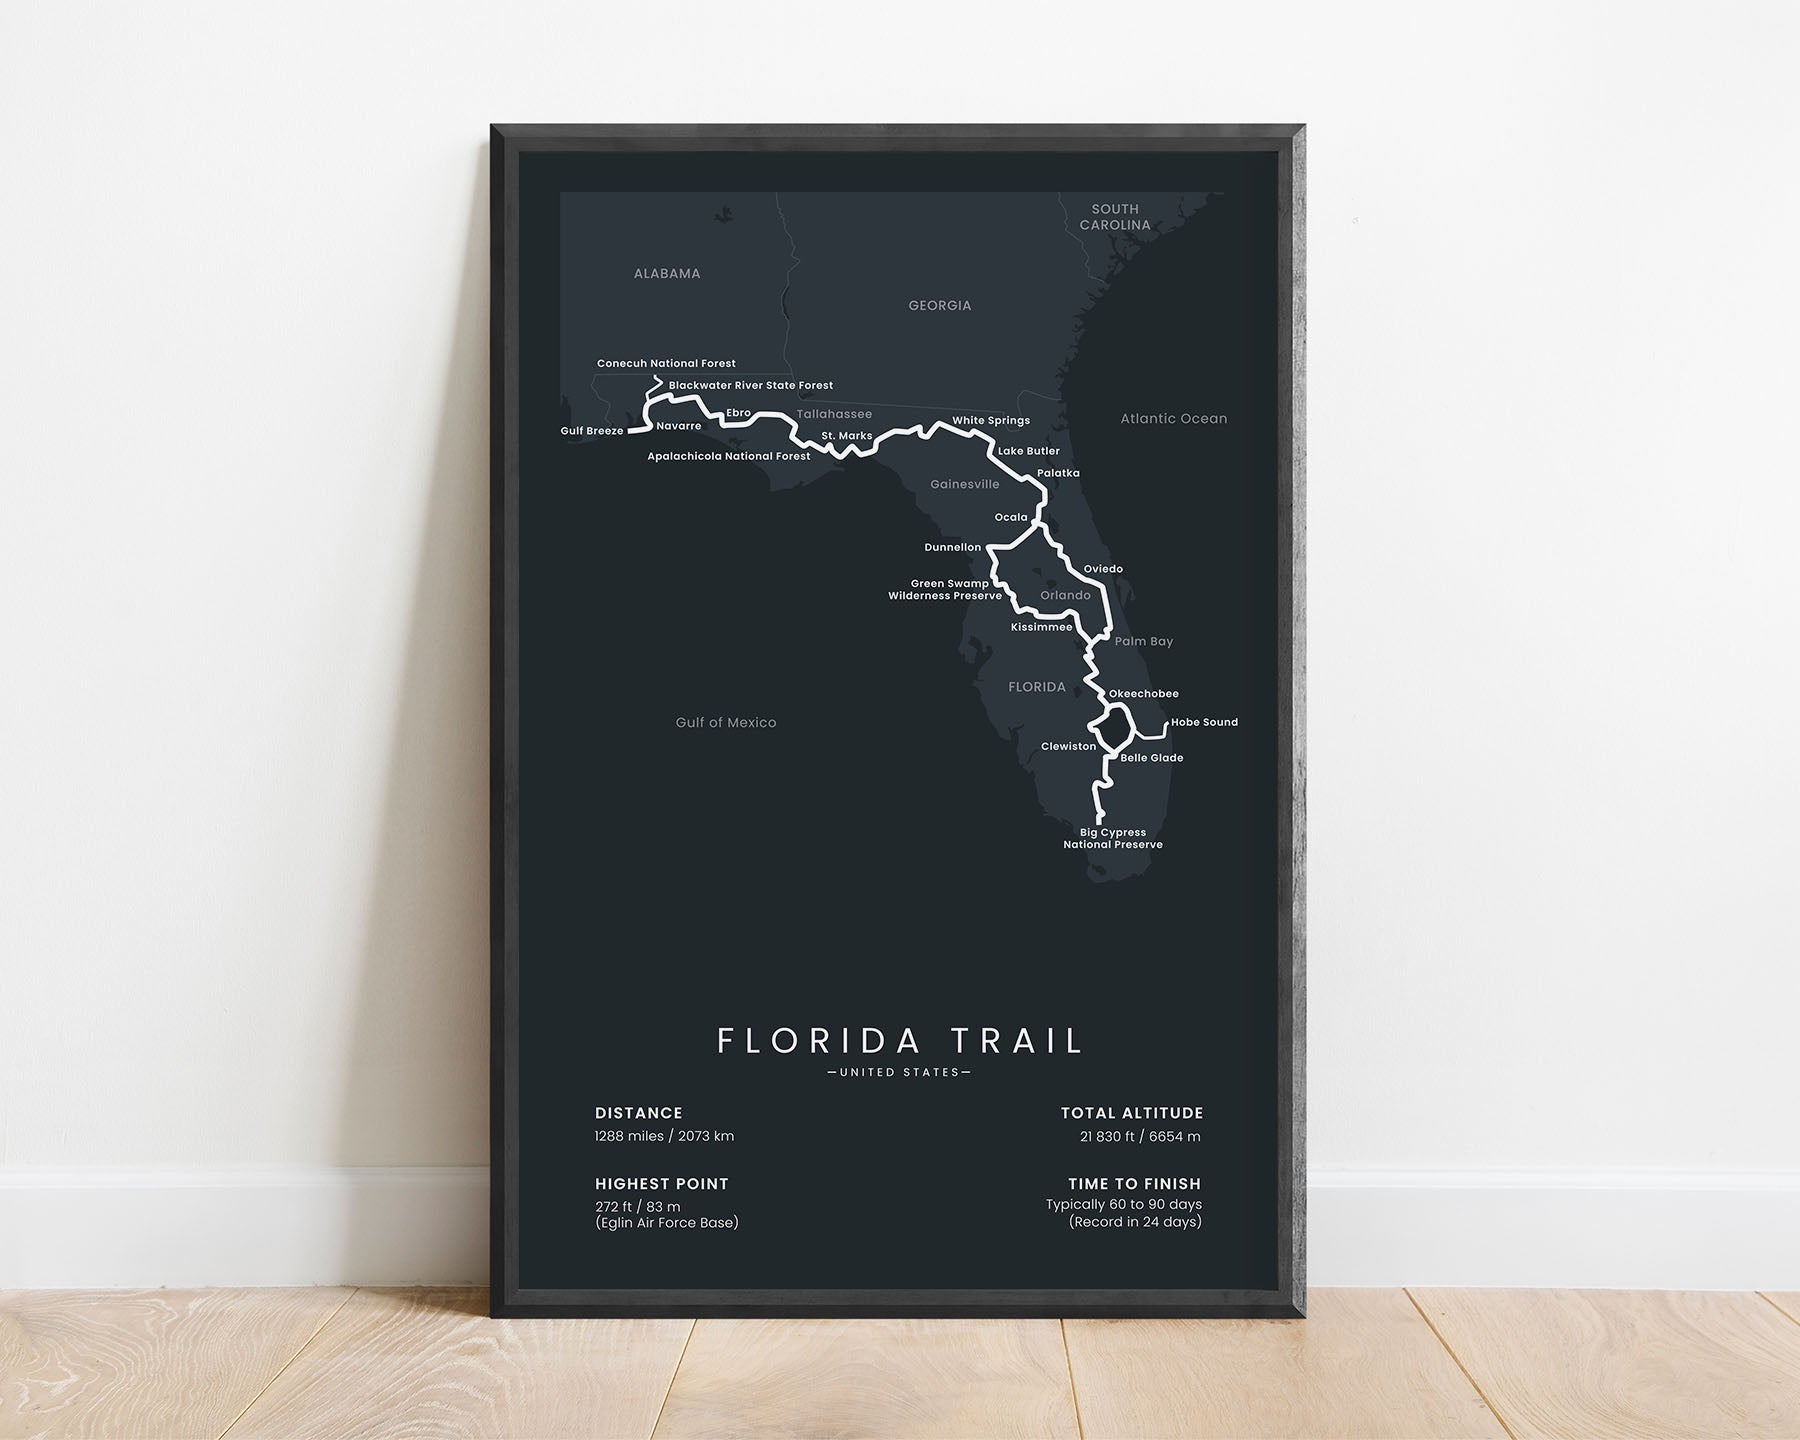 Florida Trail hiking trail print with black background (Big Cypress National Preserve to Fort Pickens)